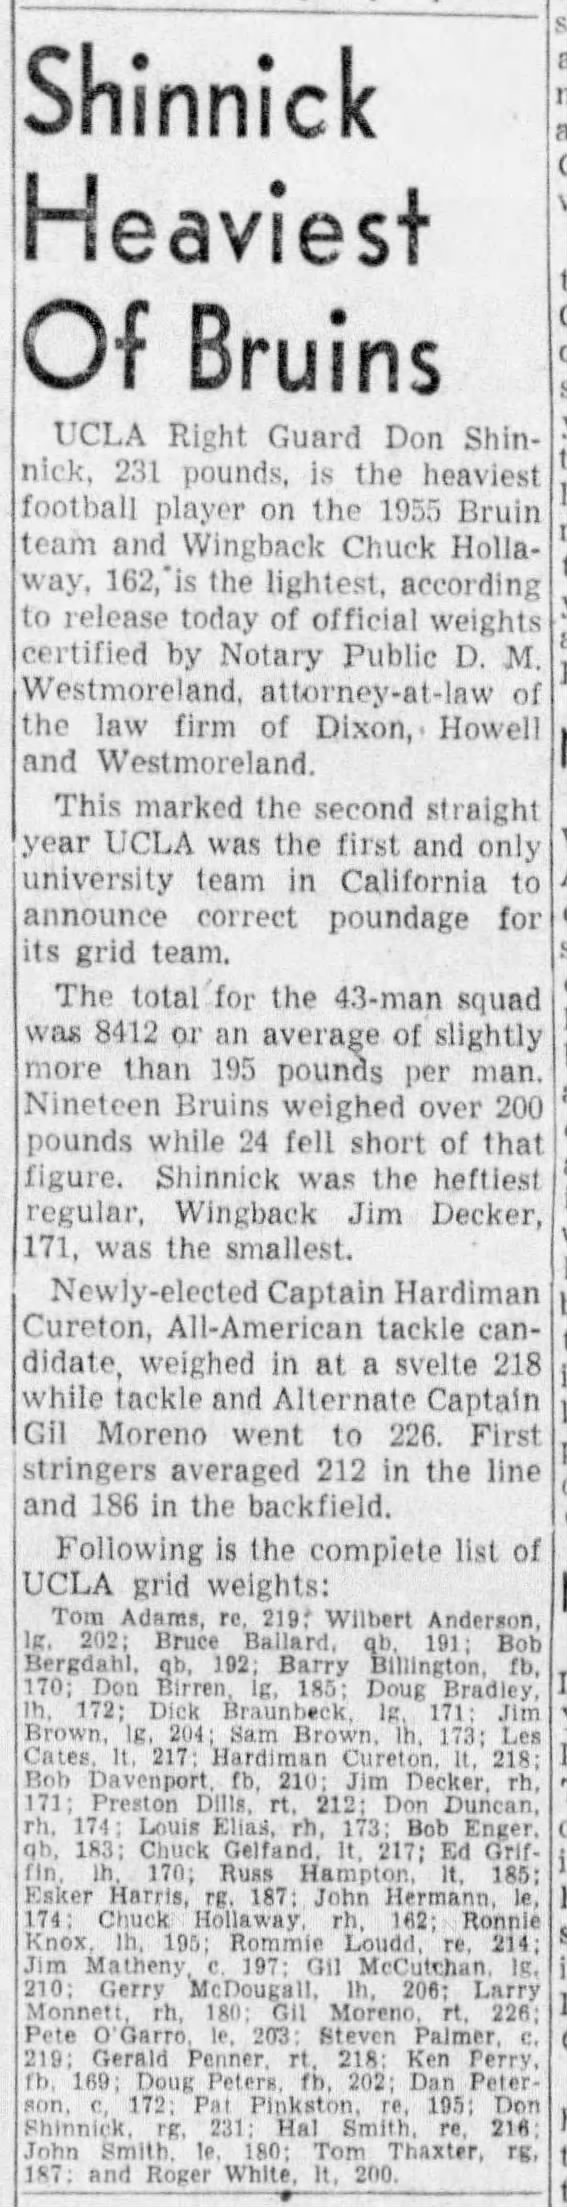 Left Guard Don Shinnick Heaviest of Bruins on 1955 Roster